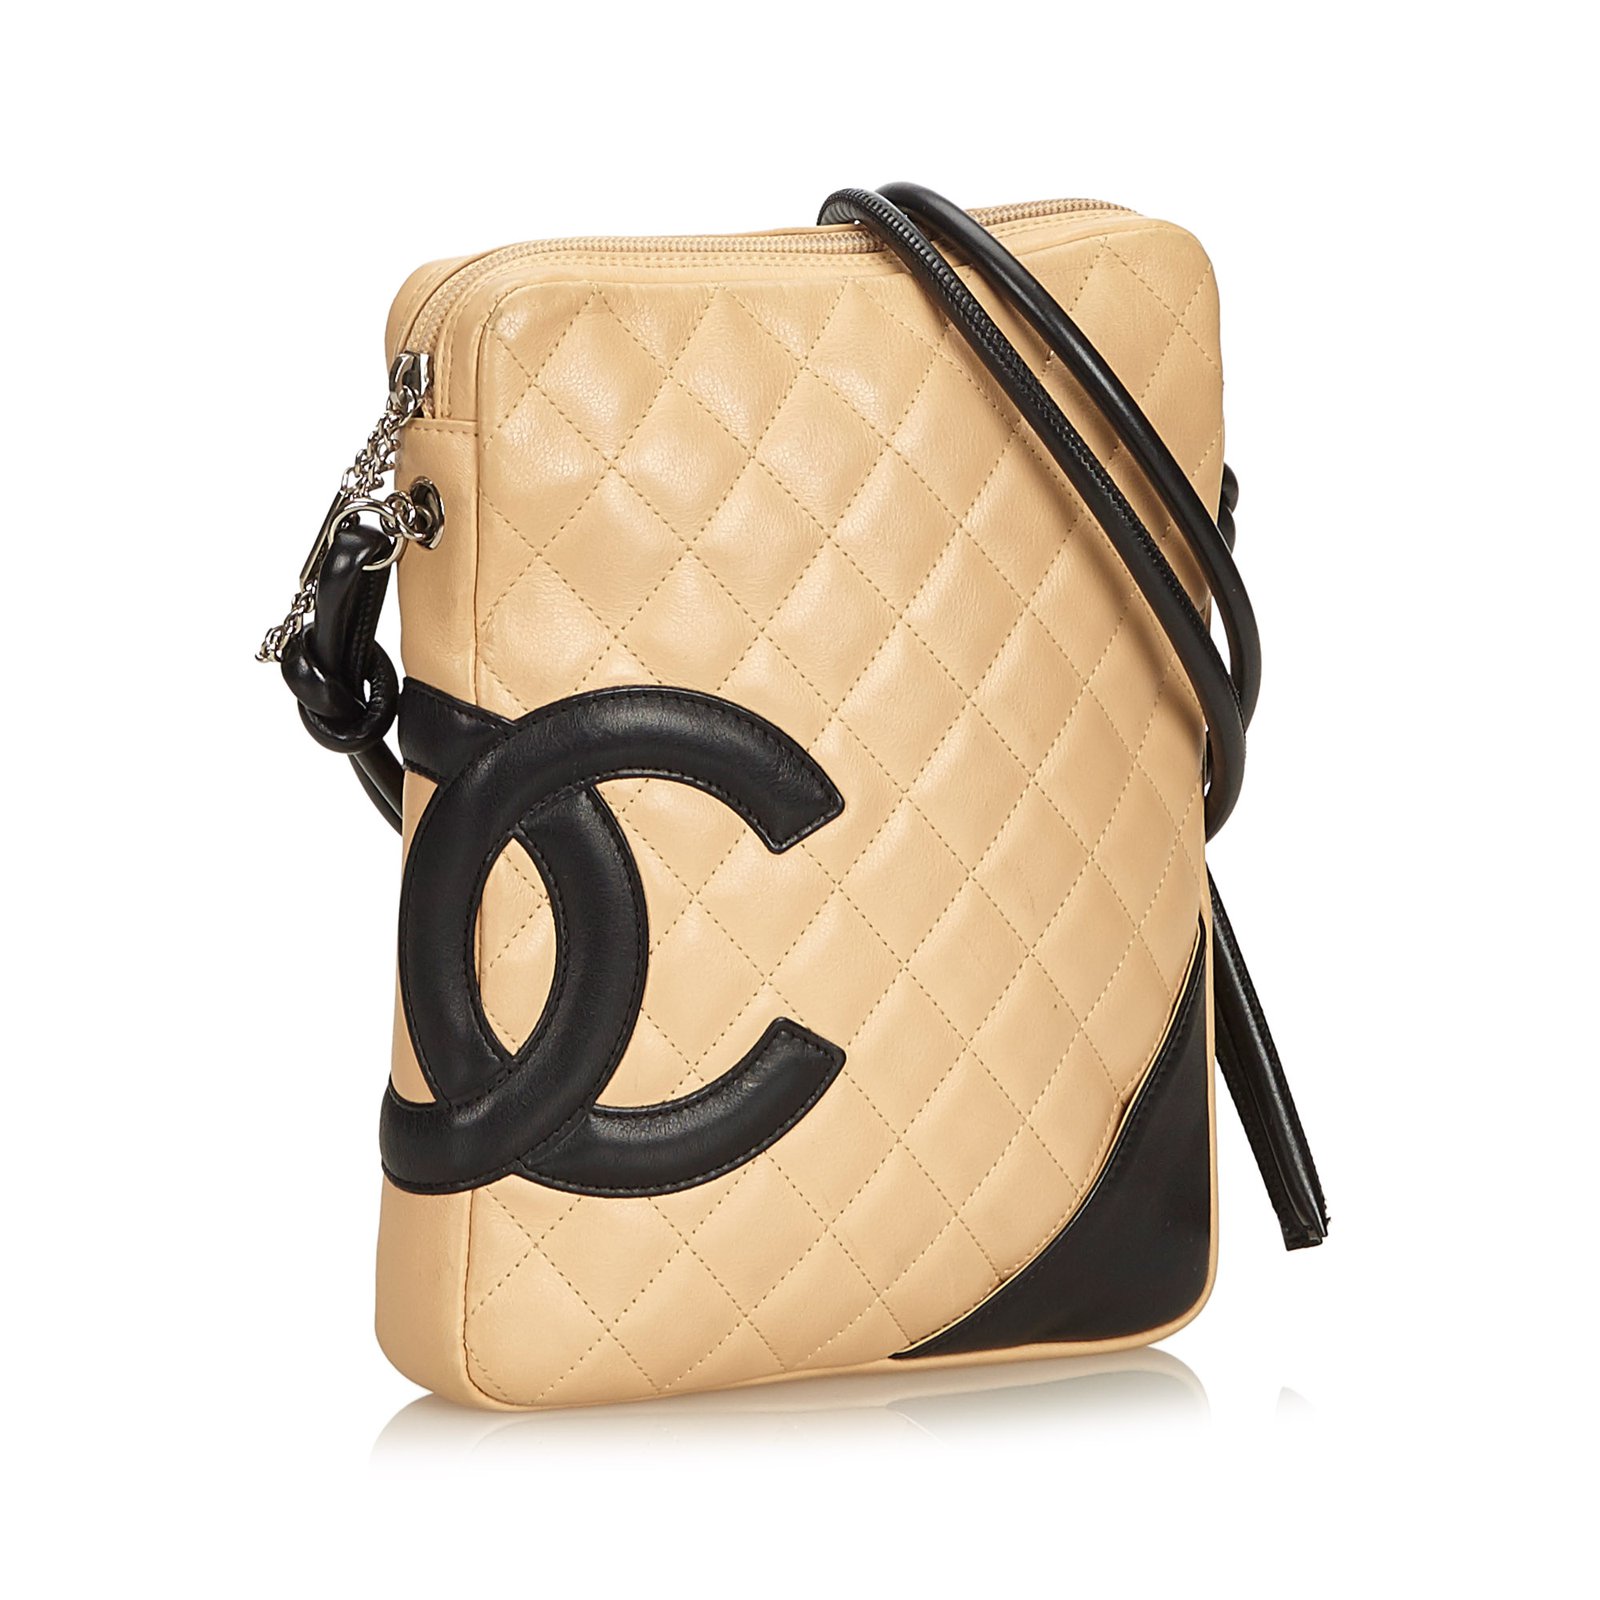 Cambon leather crossbody bag Chanel Black in Leather - 21006486